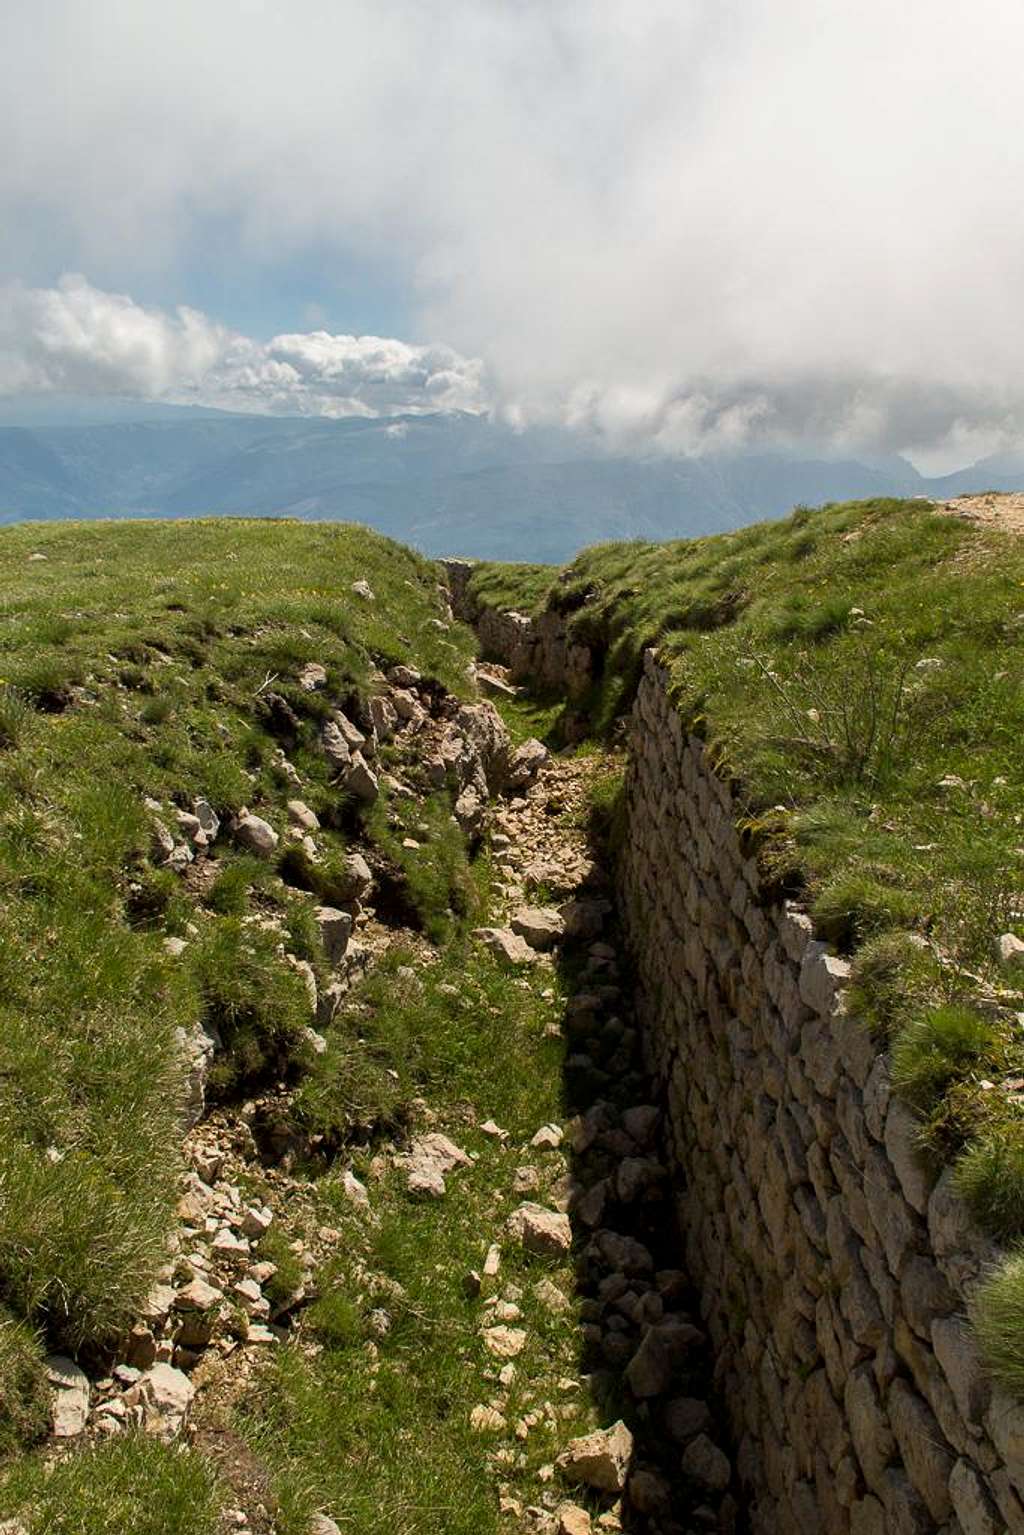 WW I trenches on Monte Altissimo, June 17th 2016